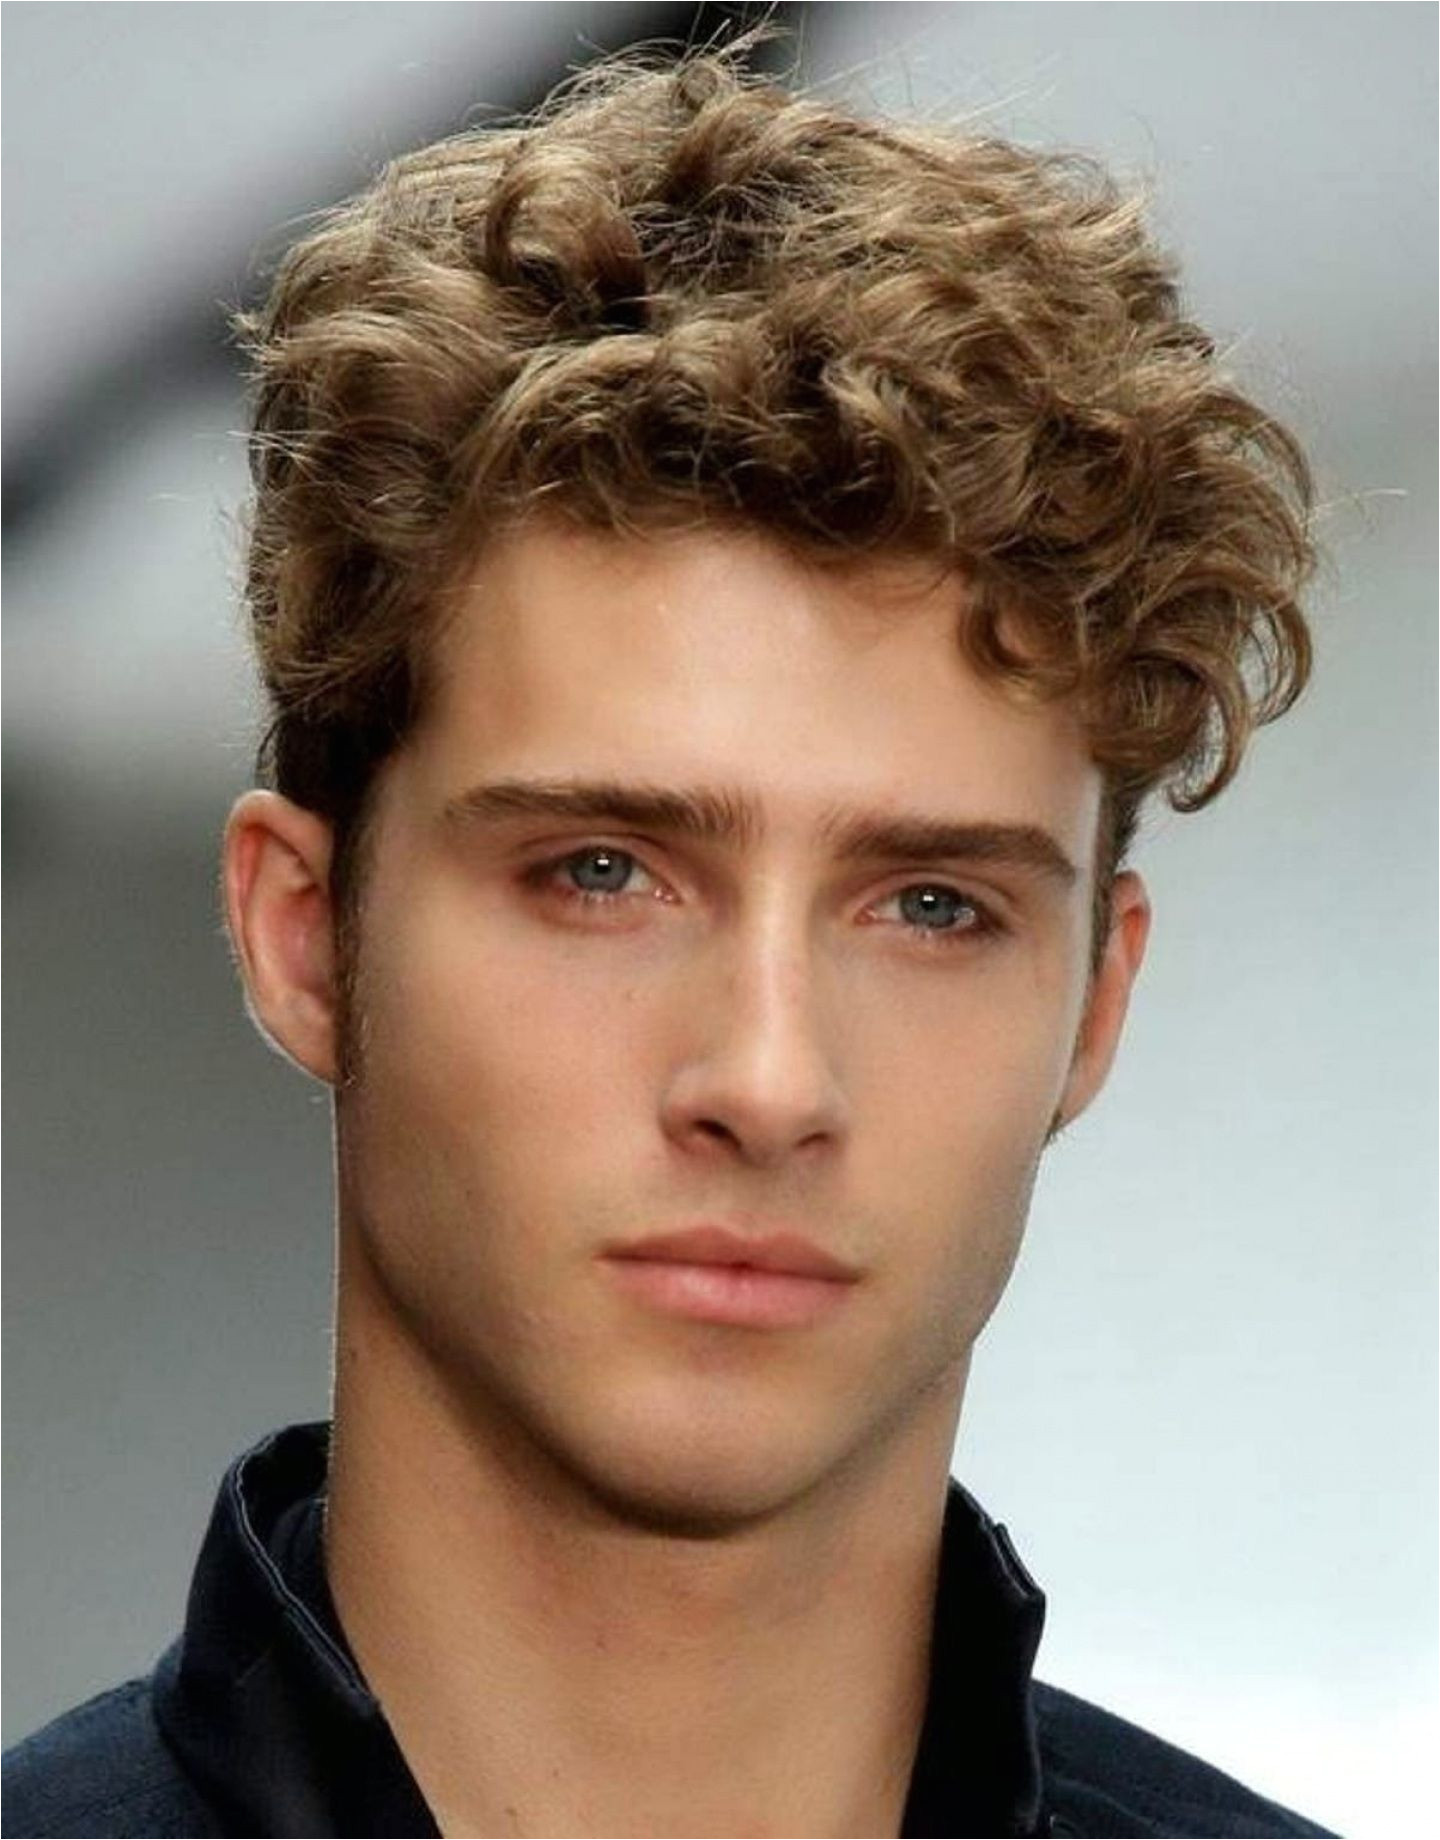 Young Men S Hairstyles Curly Hair Short Haircuts for Men with Curly Hair Darien Haircut